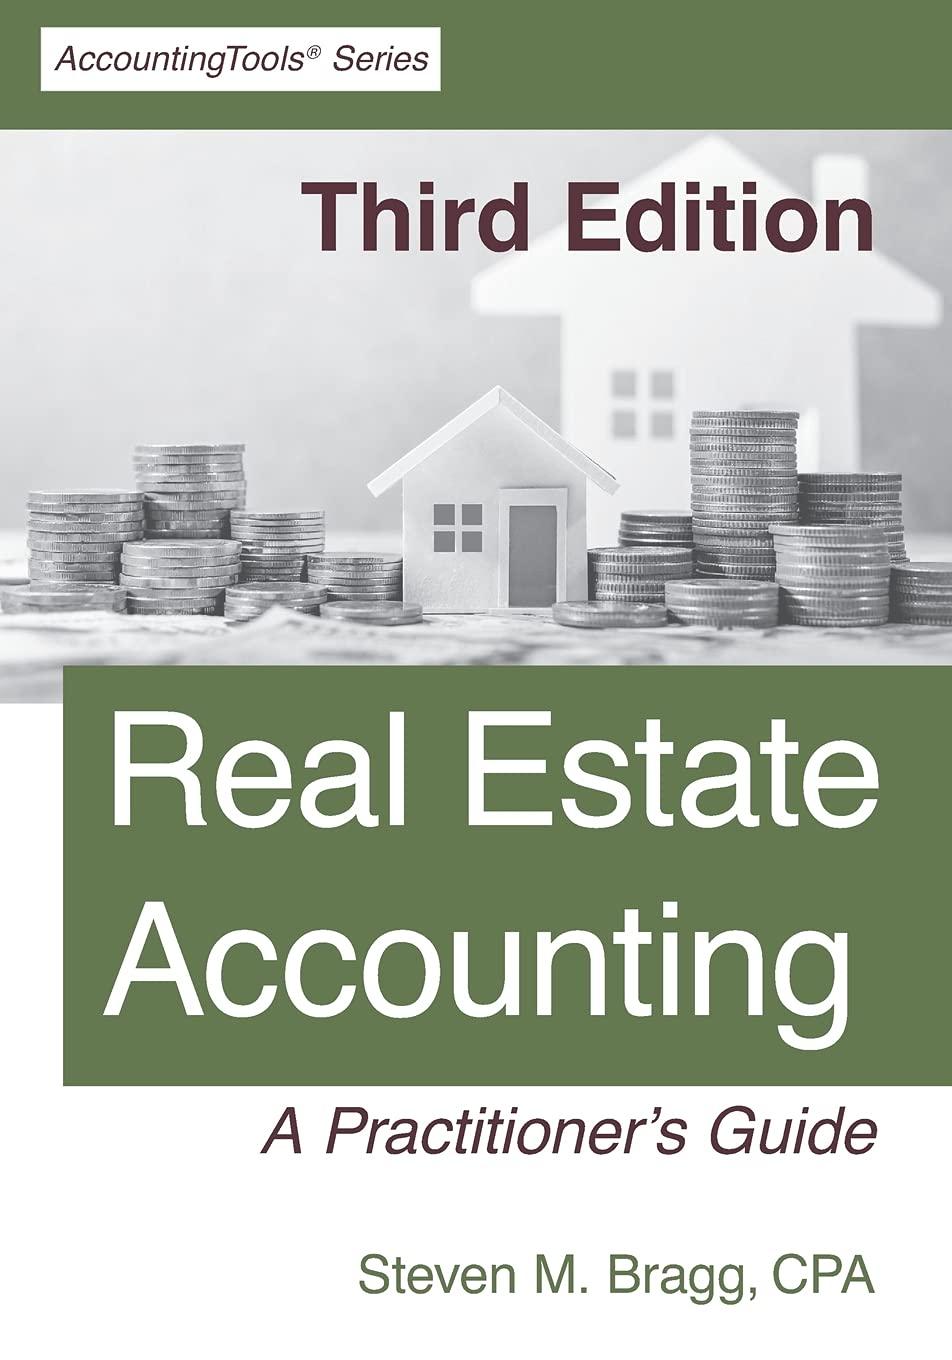 real estate accounting a practitioners guide 3rd edition steven m. bragg 164221034x, 978-1642210347